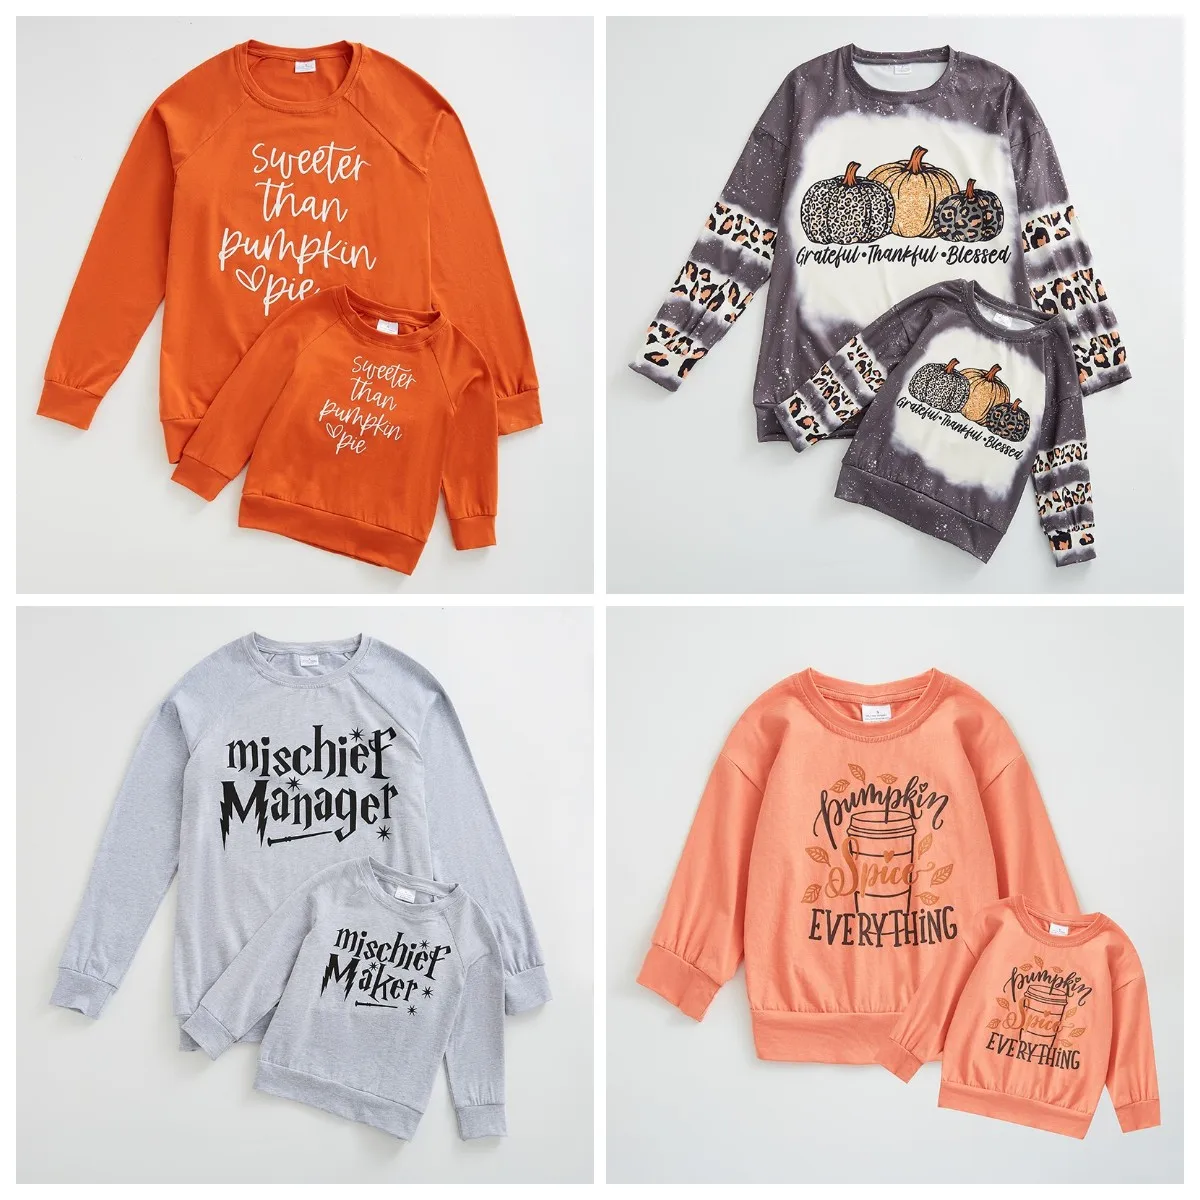 Girlymax Fall Thanksgiving Baby Girls Mommy &Me Leopard Pumpkin Pie Thankful Boutique Top T-shirts Kids Clothing Sweatshirts